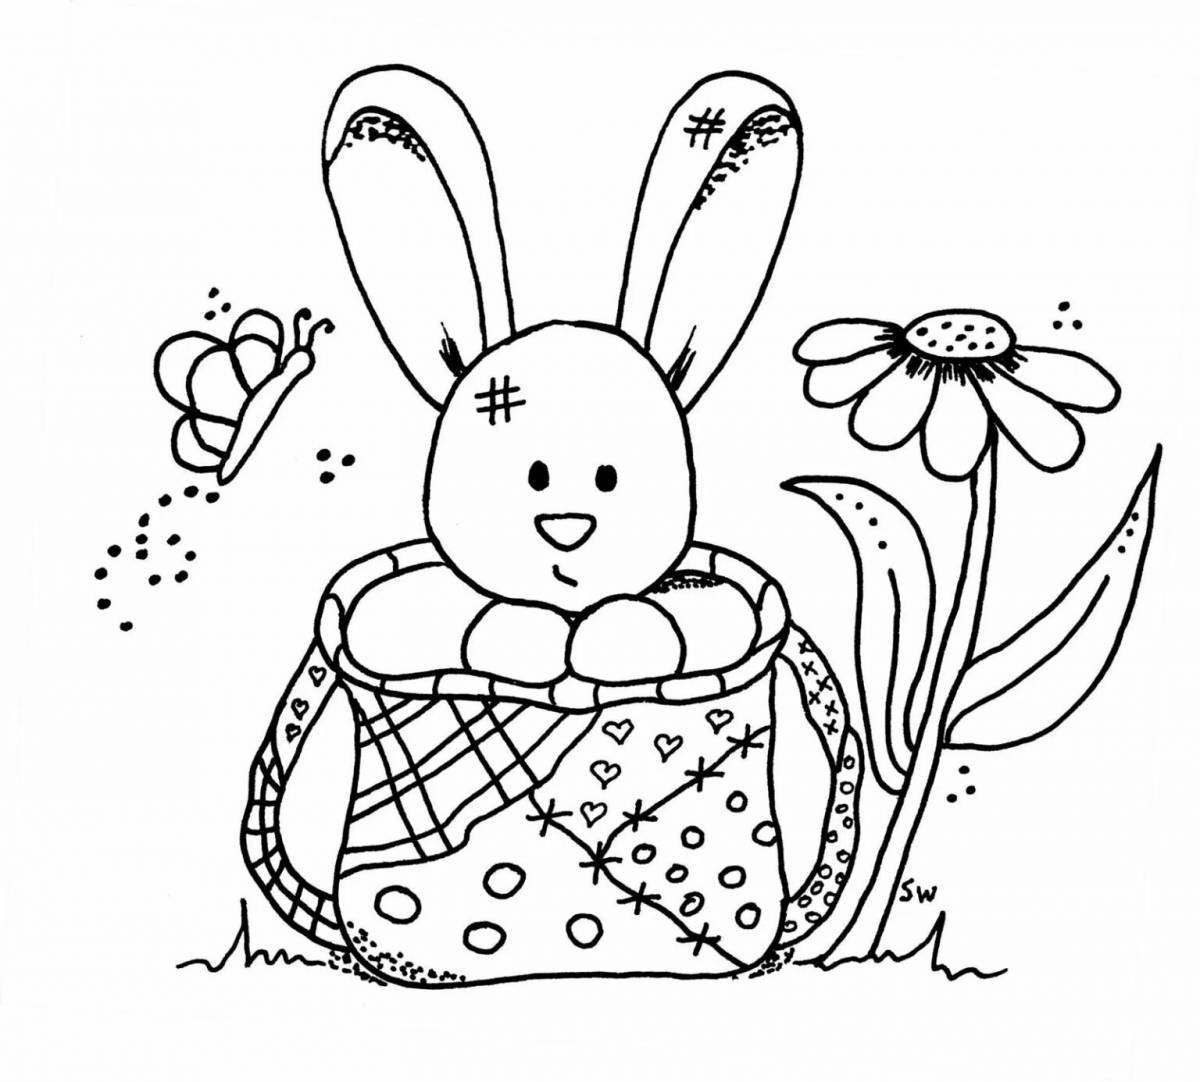 Charming new year bunny coloring book